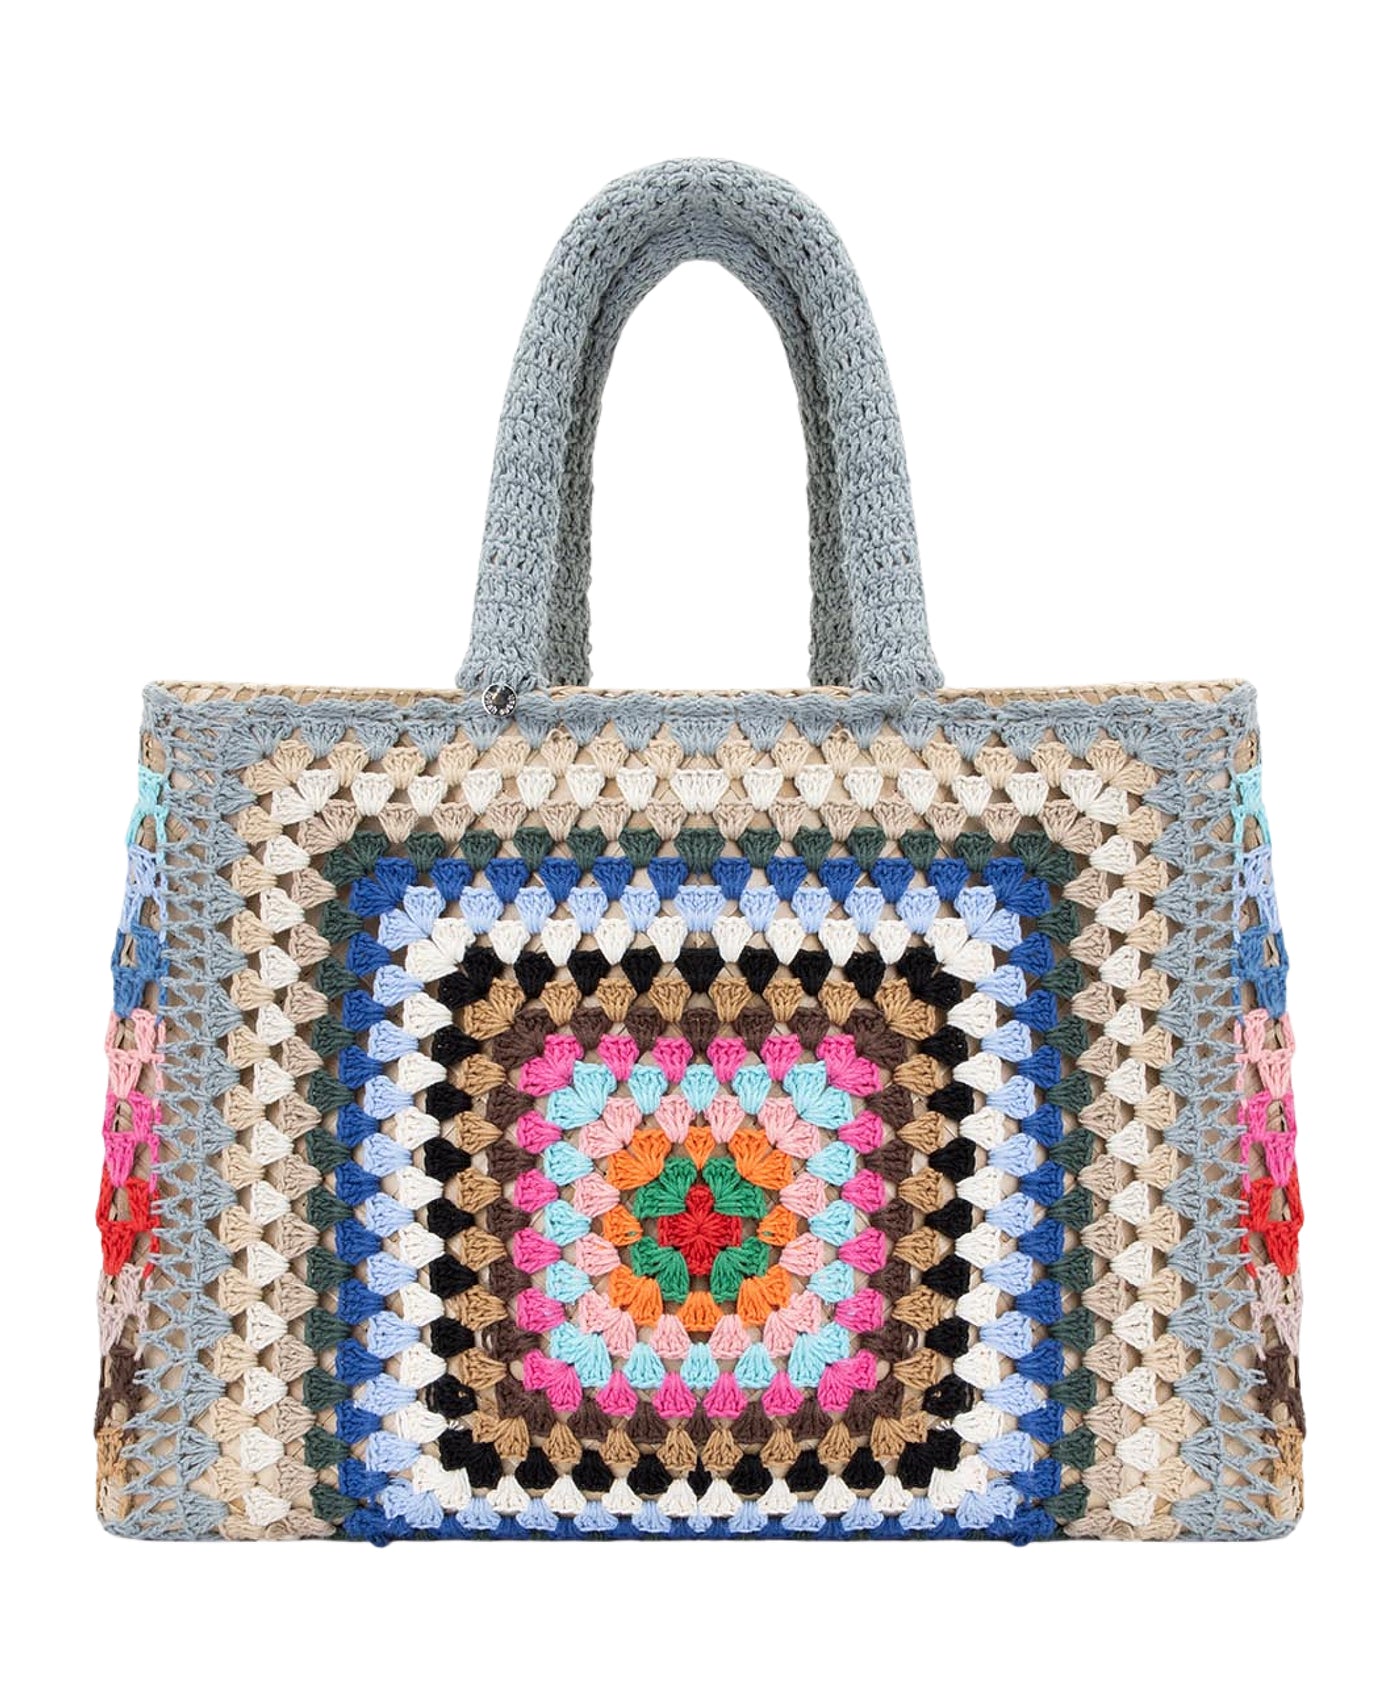 Straw Tote Bag w/ Knitted Crochet Cover view 1